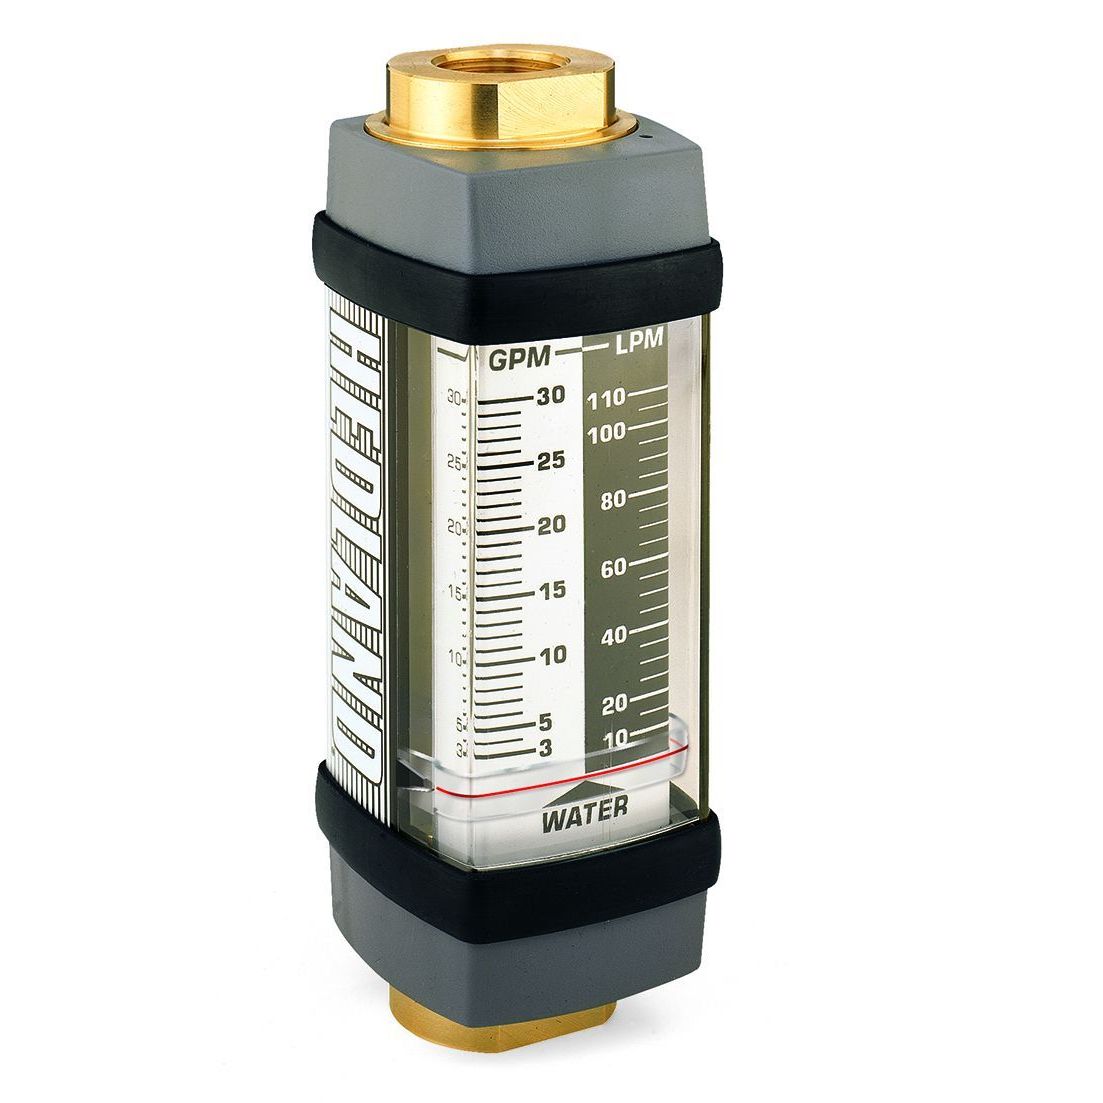 H605B-010 : Hedland 3500psi Brass Flow Meter for Water, 1/2 NPT, 0.1 to 1.0 GPM